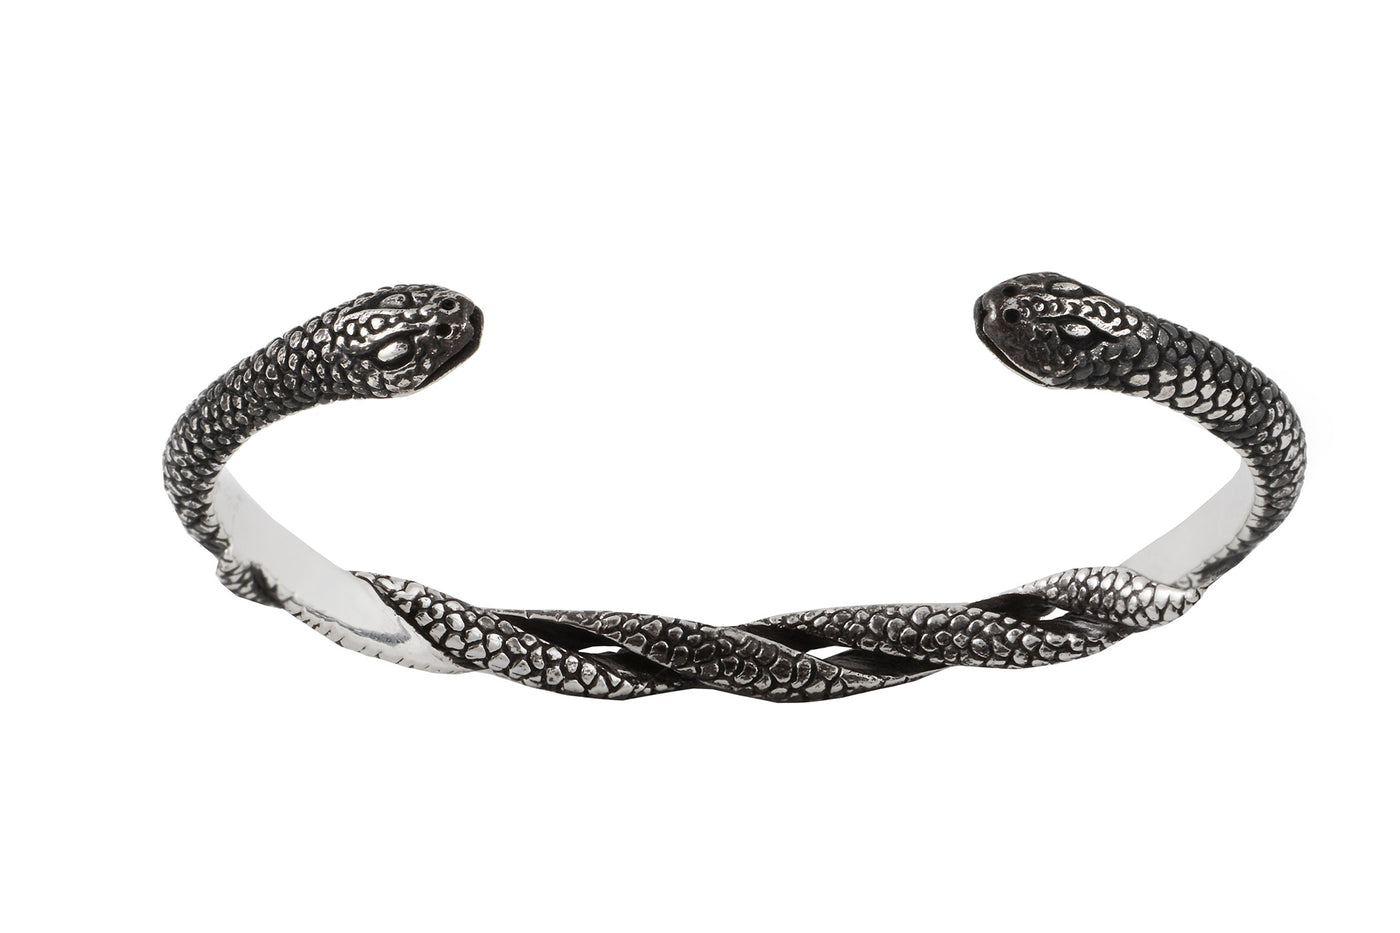 Intertwined snakes bracelet cuff. Silver, oxidized